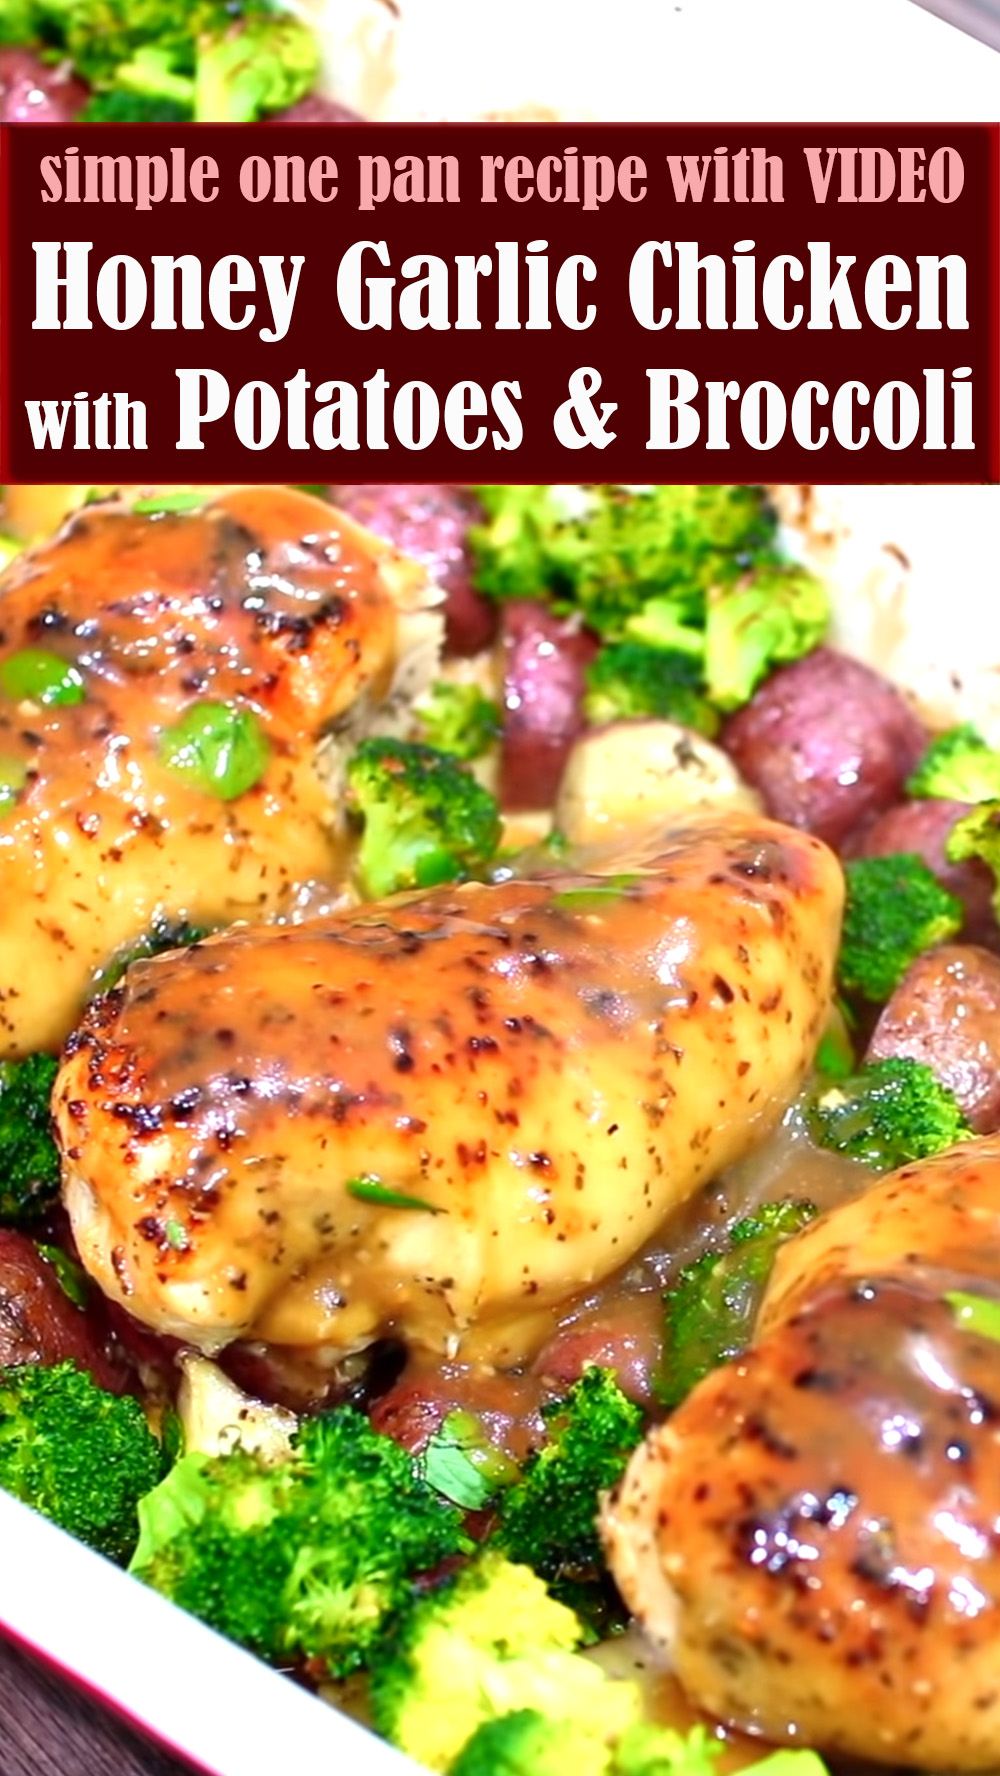 Simple Honey Garlic Chicken with Potatoes and Broccoli